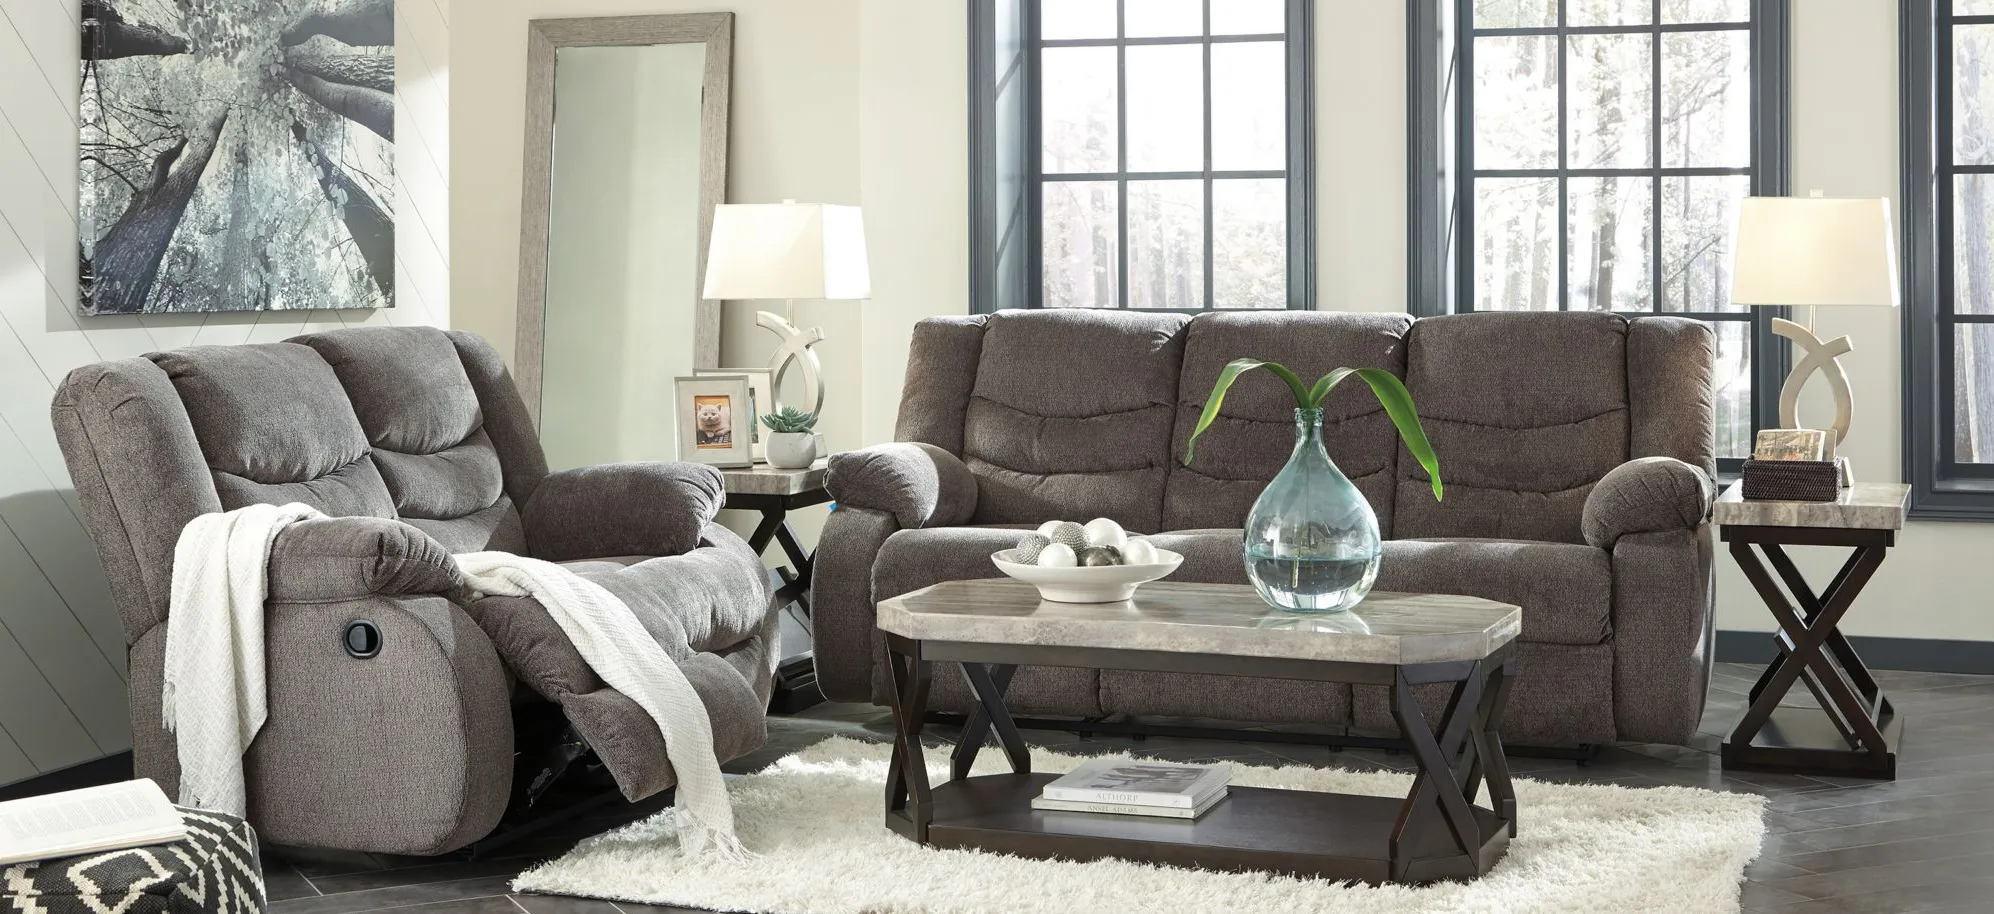 Southgate 2-pc.. Reclining Sofa and Loveseat Set in Gray by Ashley Furniture